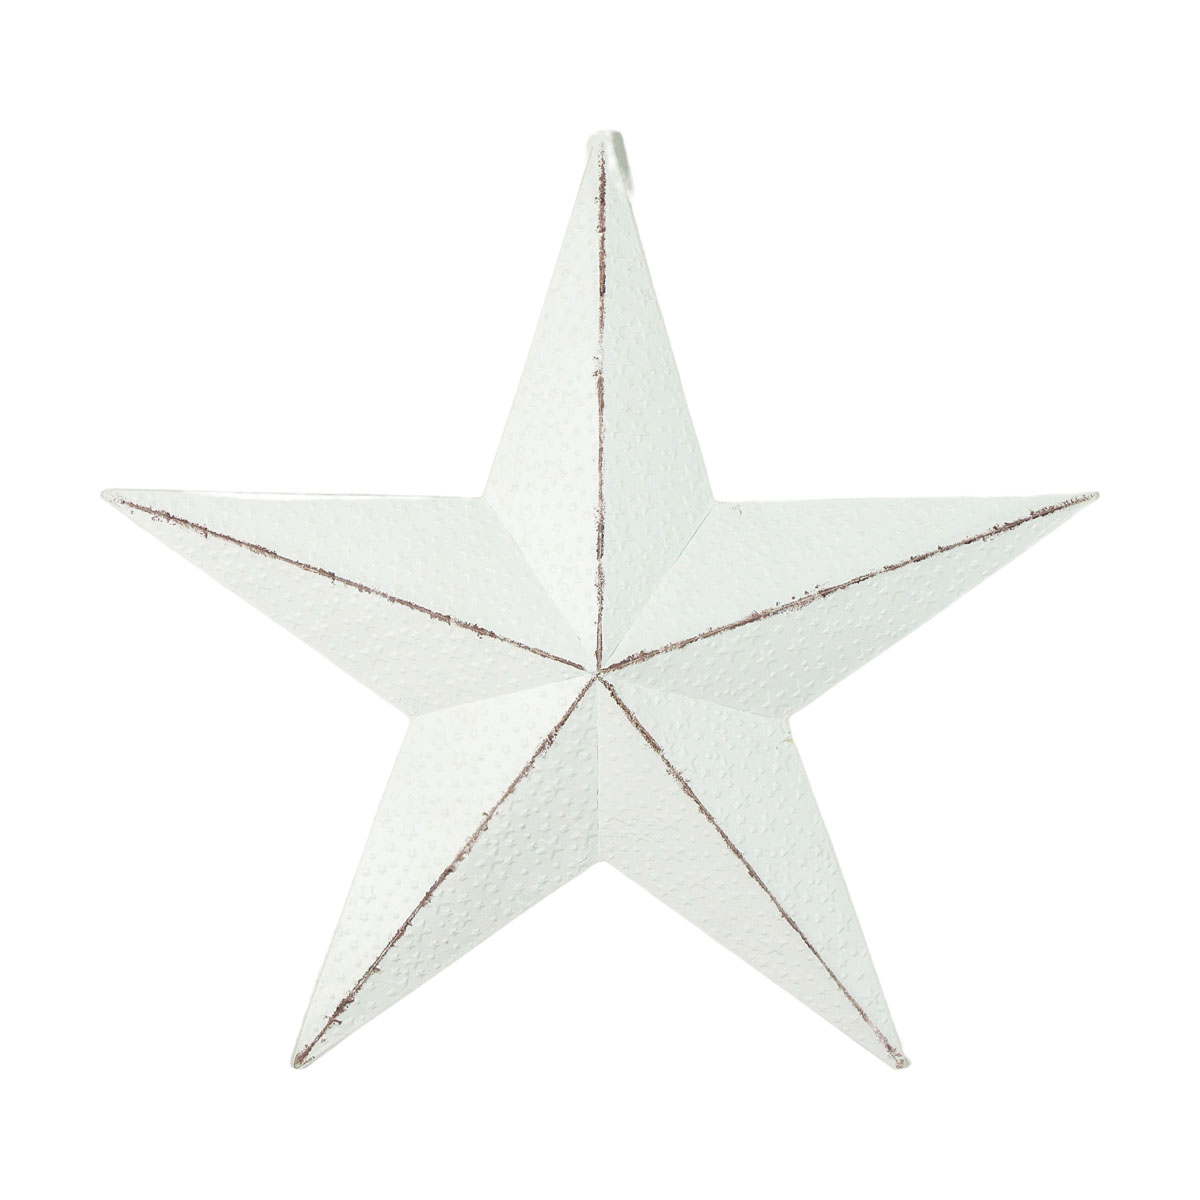 Sula Textured Star White Large 605x70x580mm